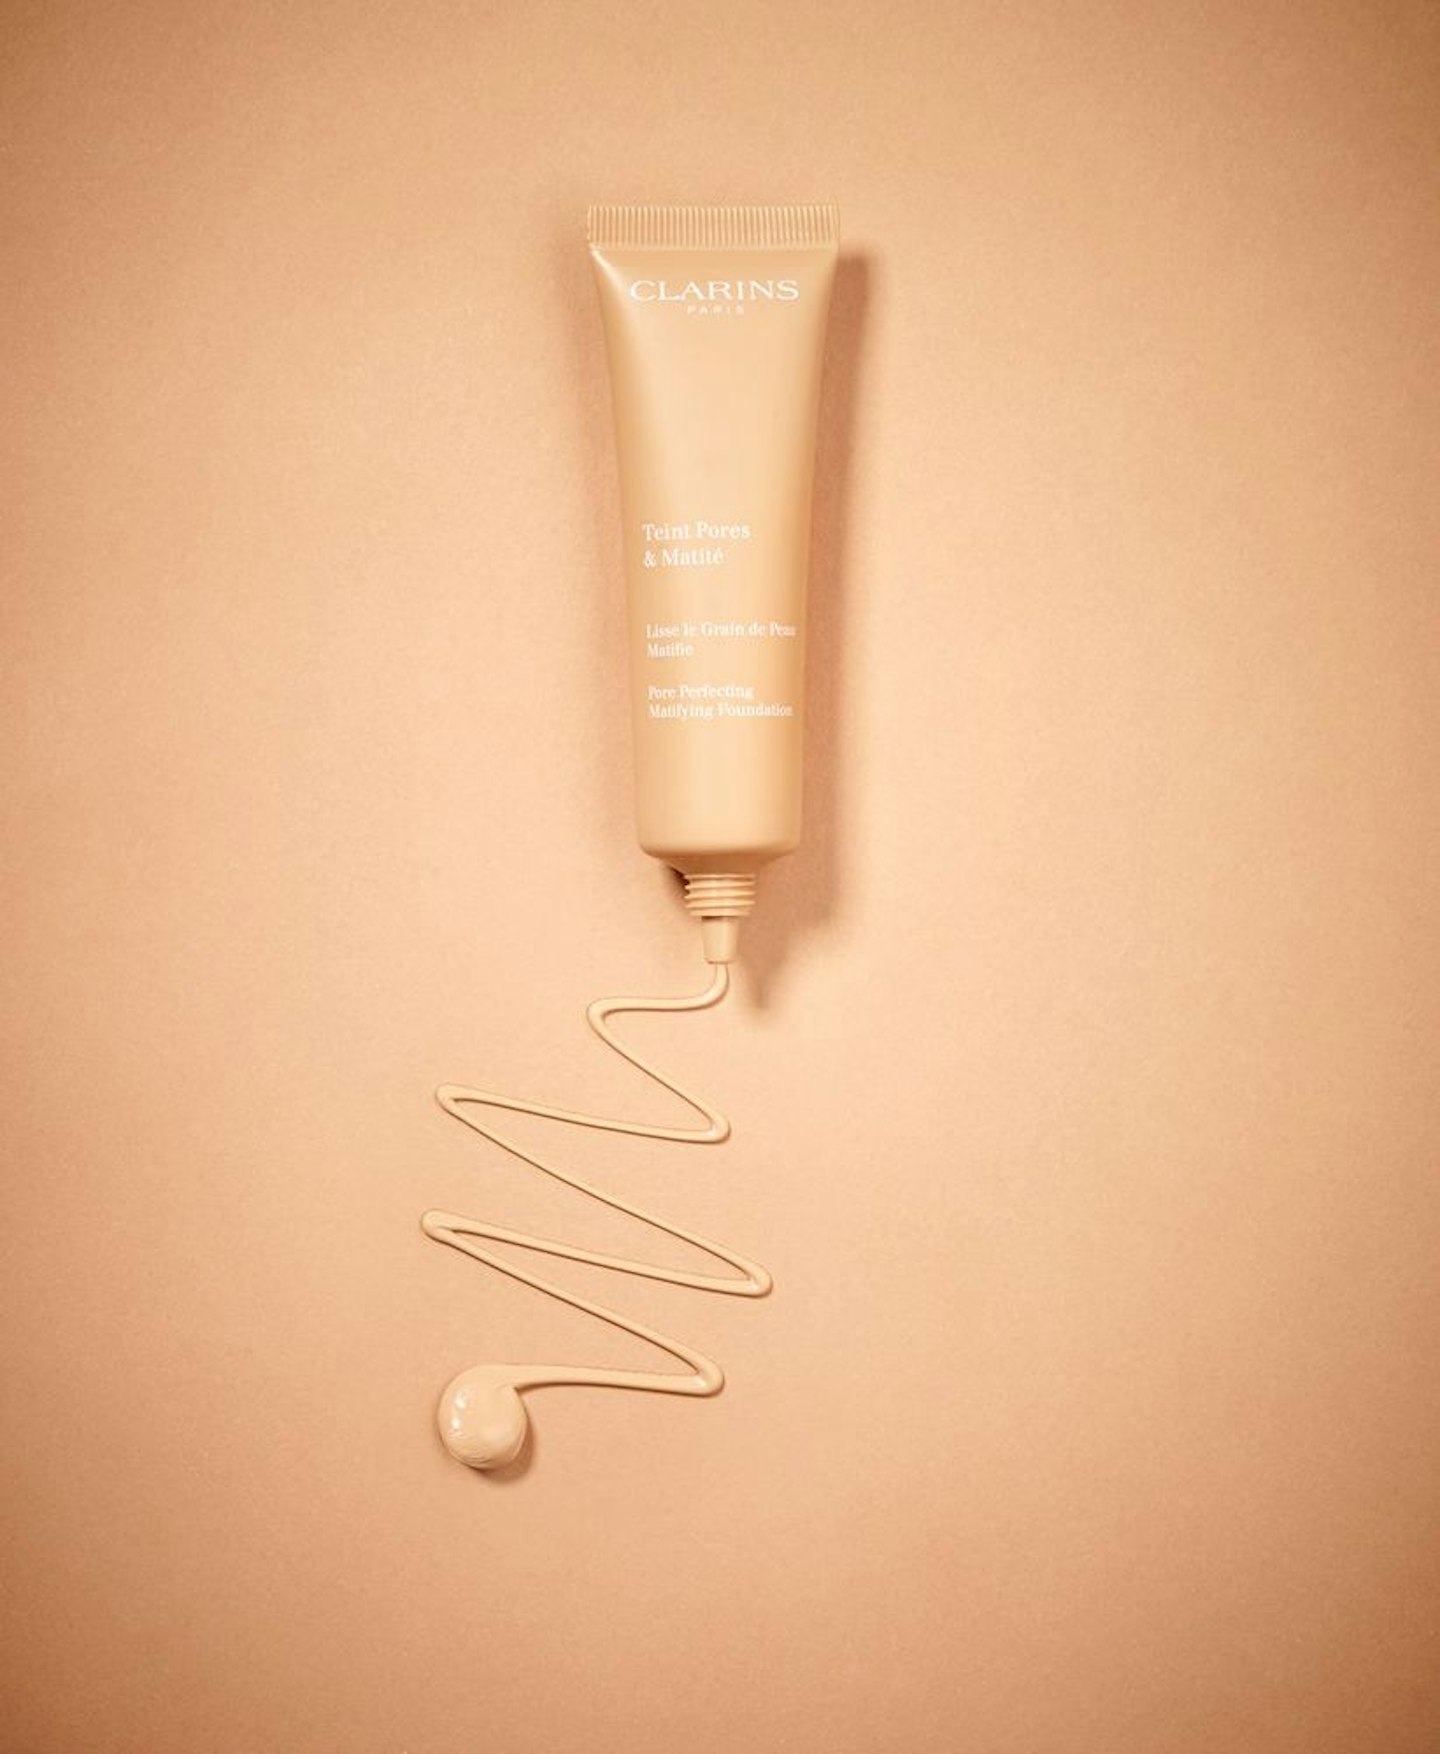 Best Full Coverage Foundation: Clarins pore perfecting mattifying foundation, £28